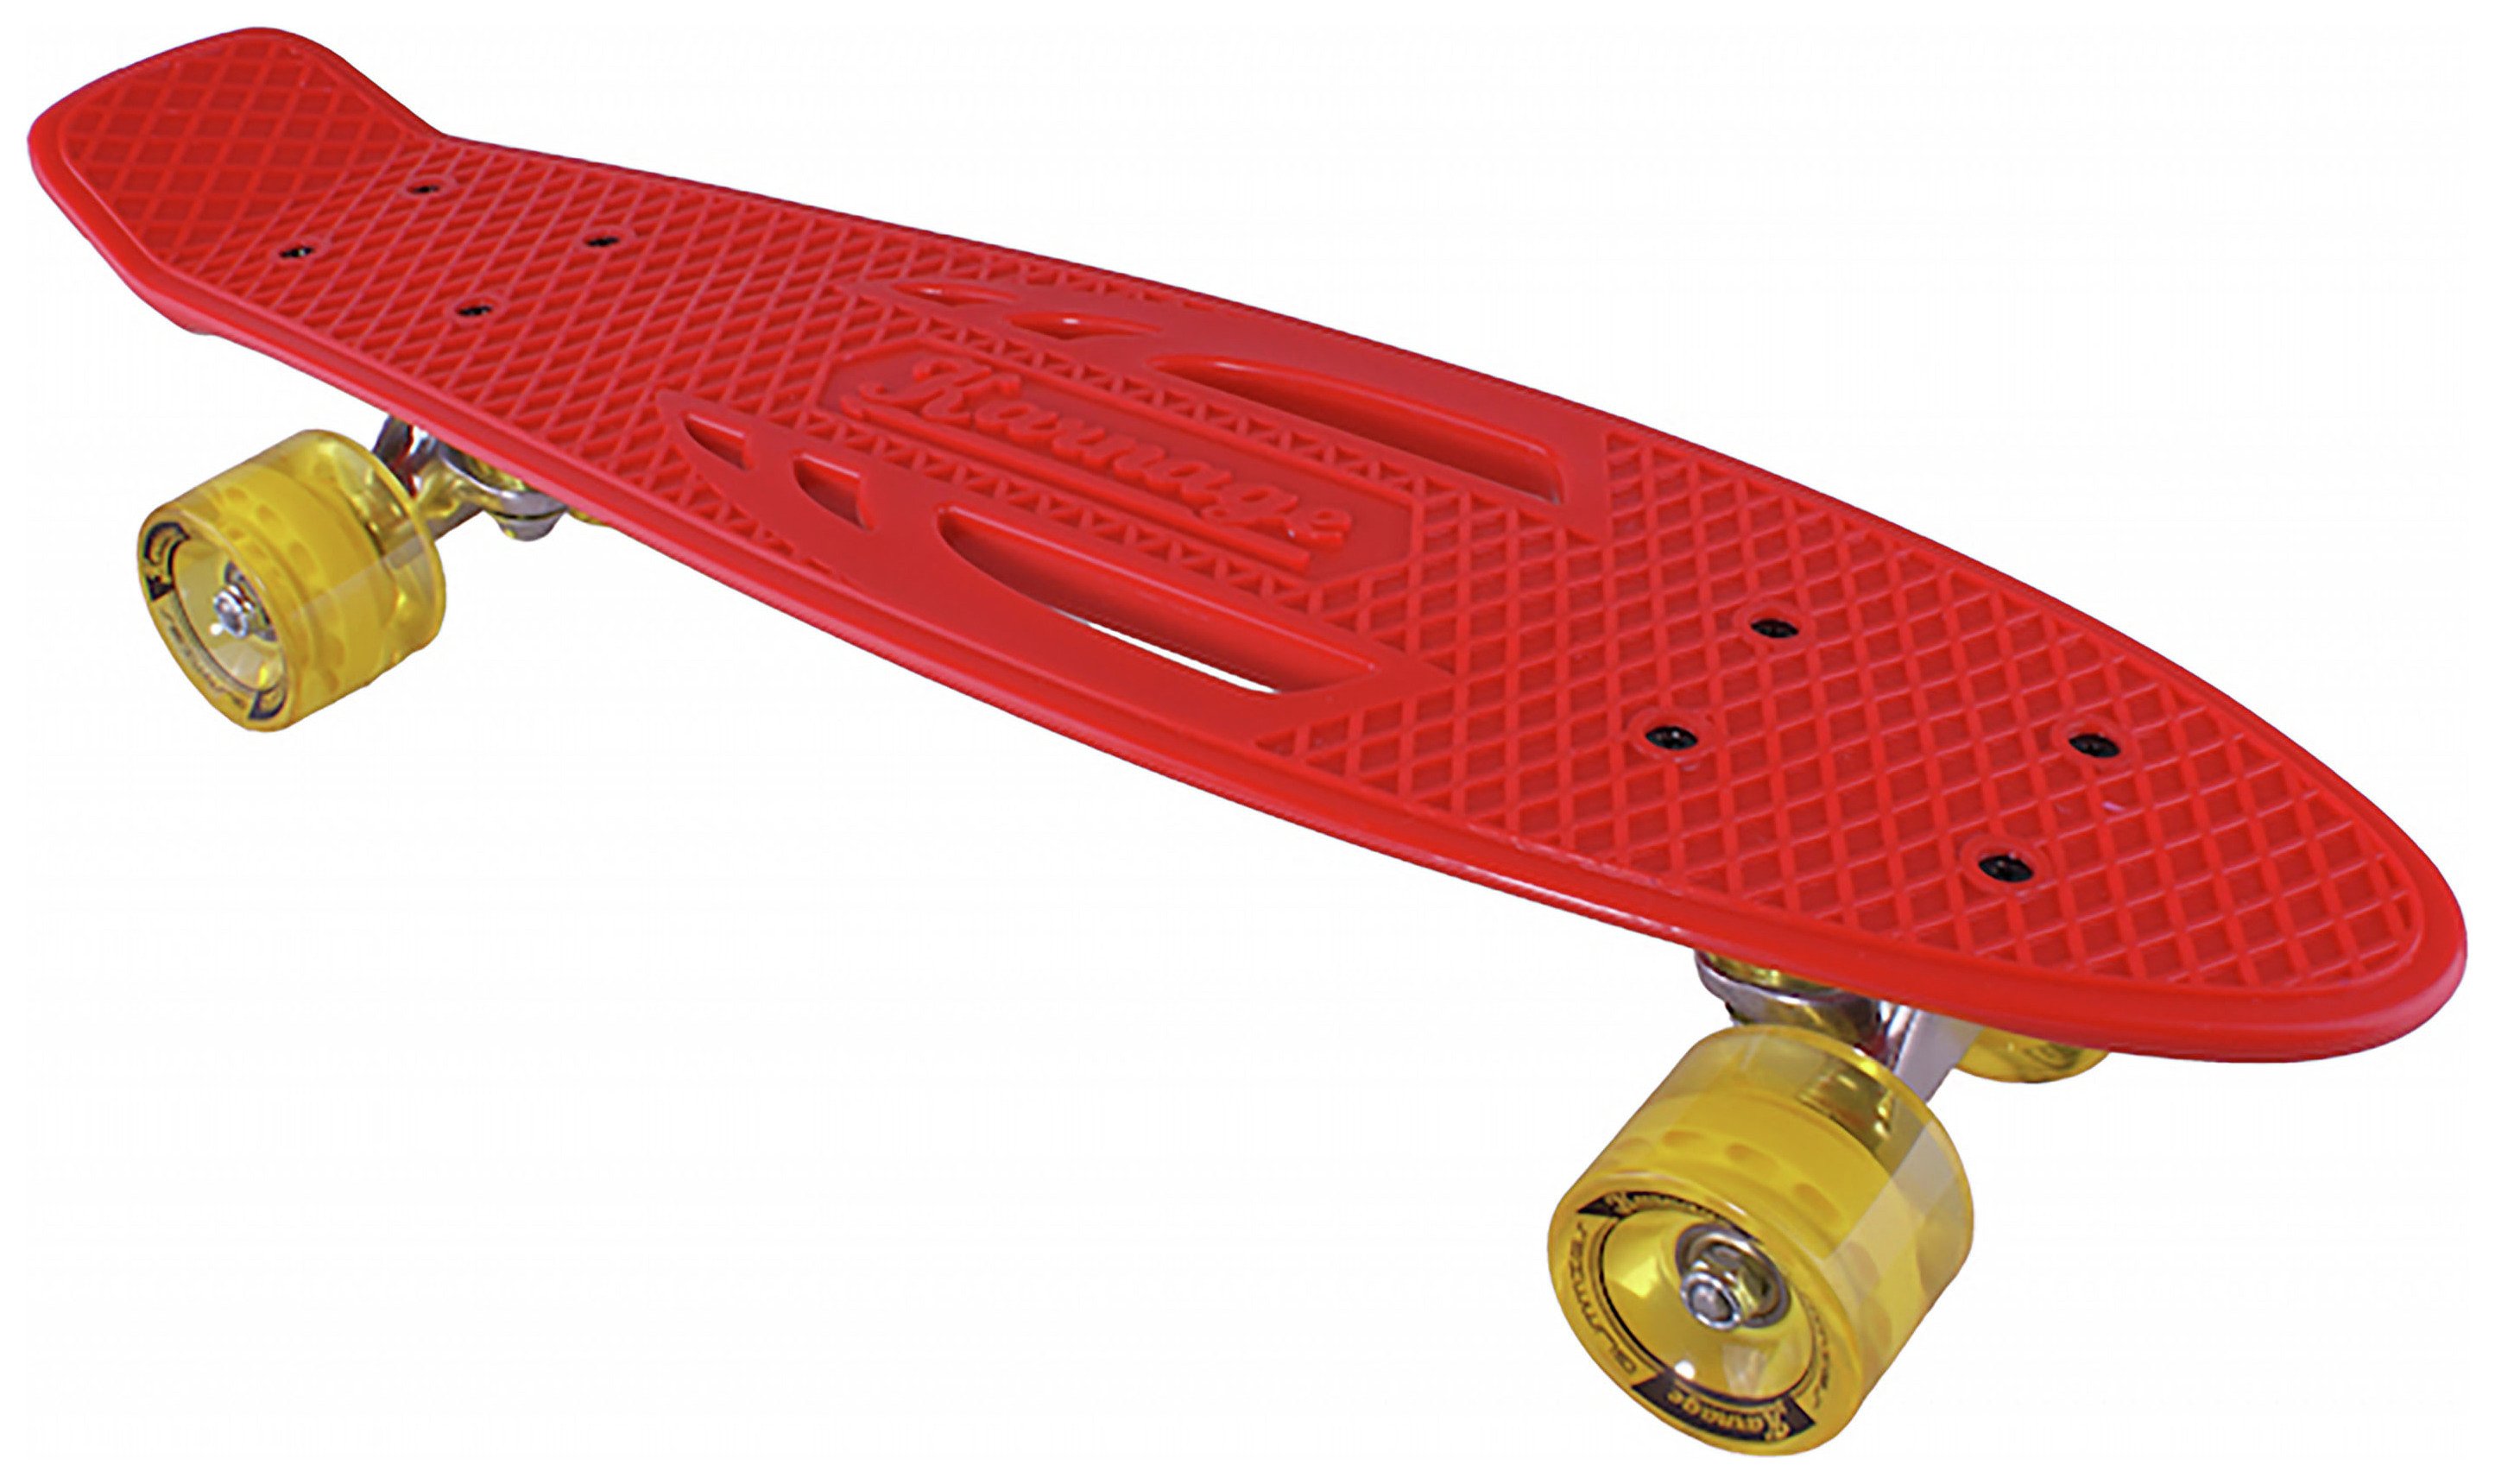 Karnage Retro Skateboard - Red and Yellow